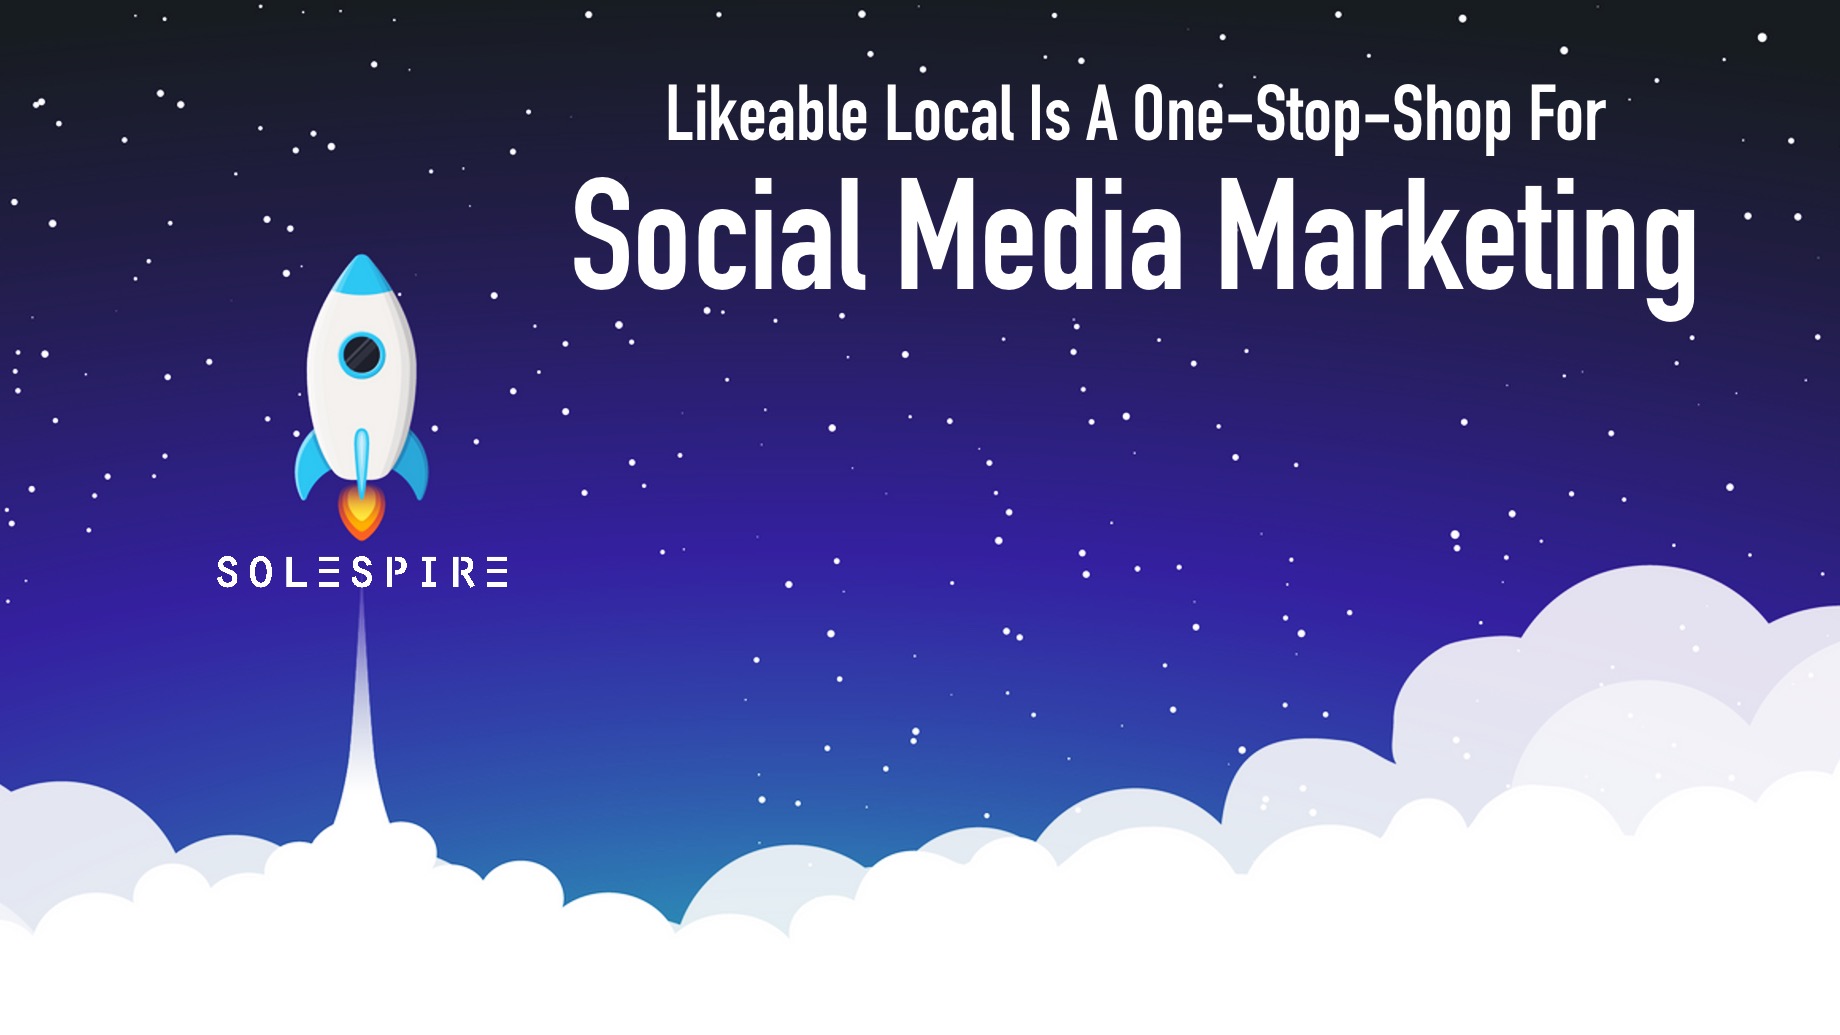 Likeable Local Is A One-Stop-Shop For Social Media Marketing